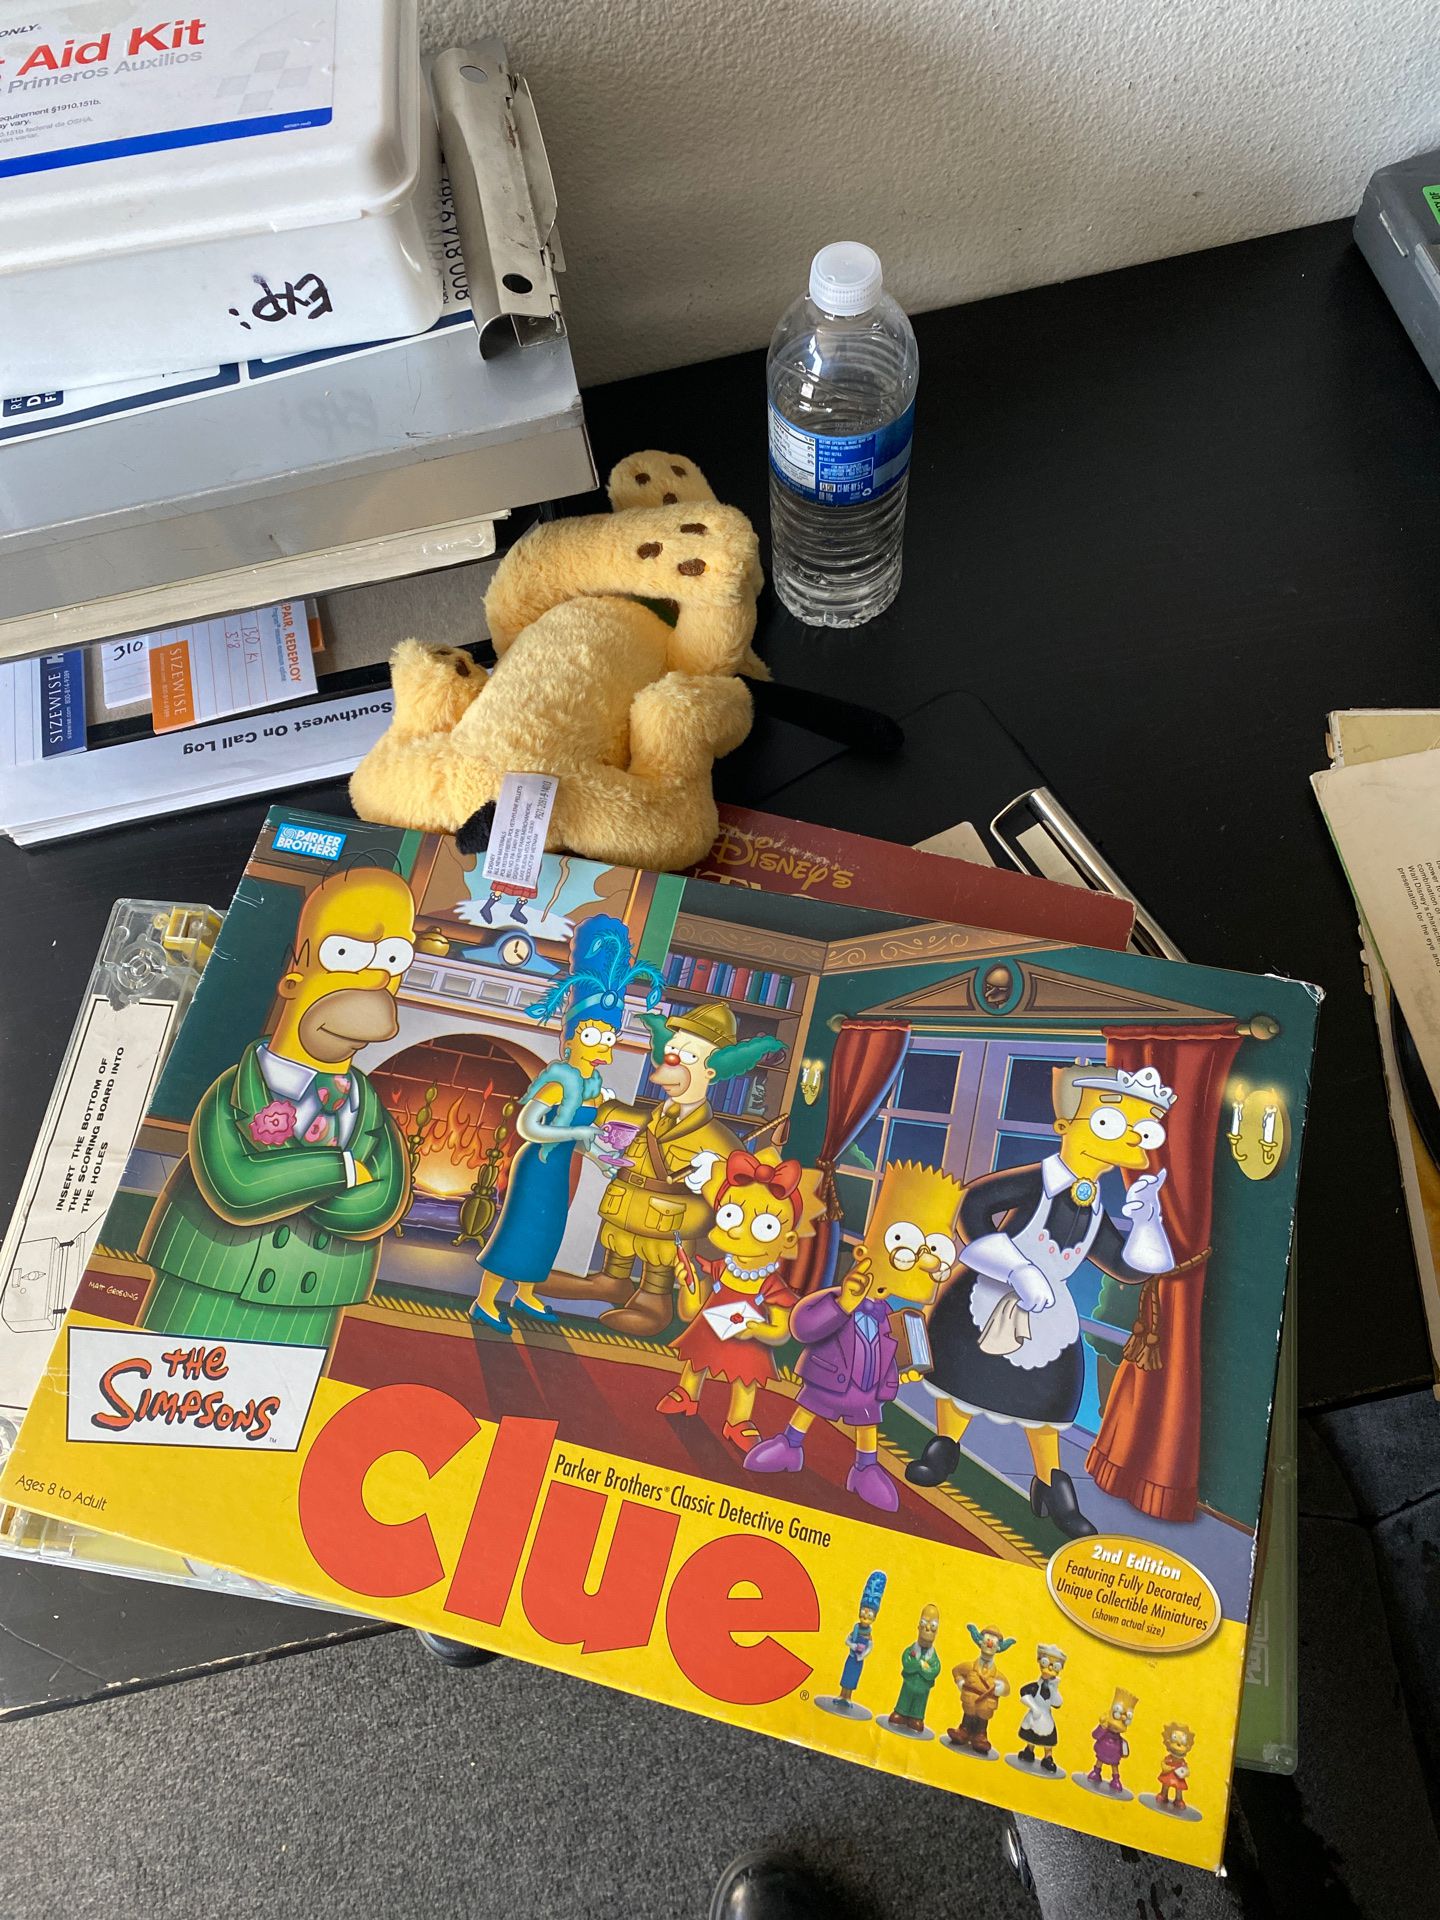 The Simpson clue board game